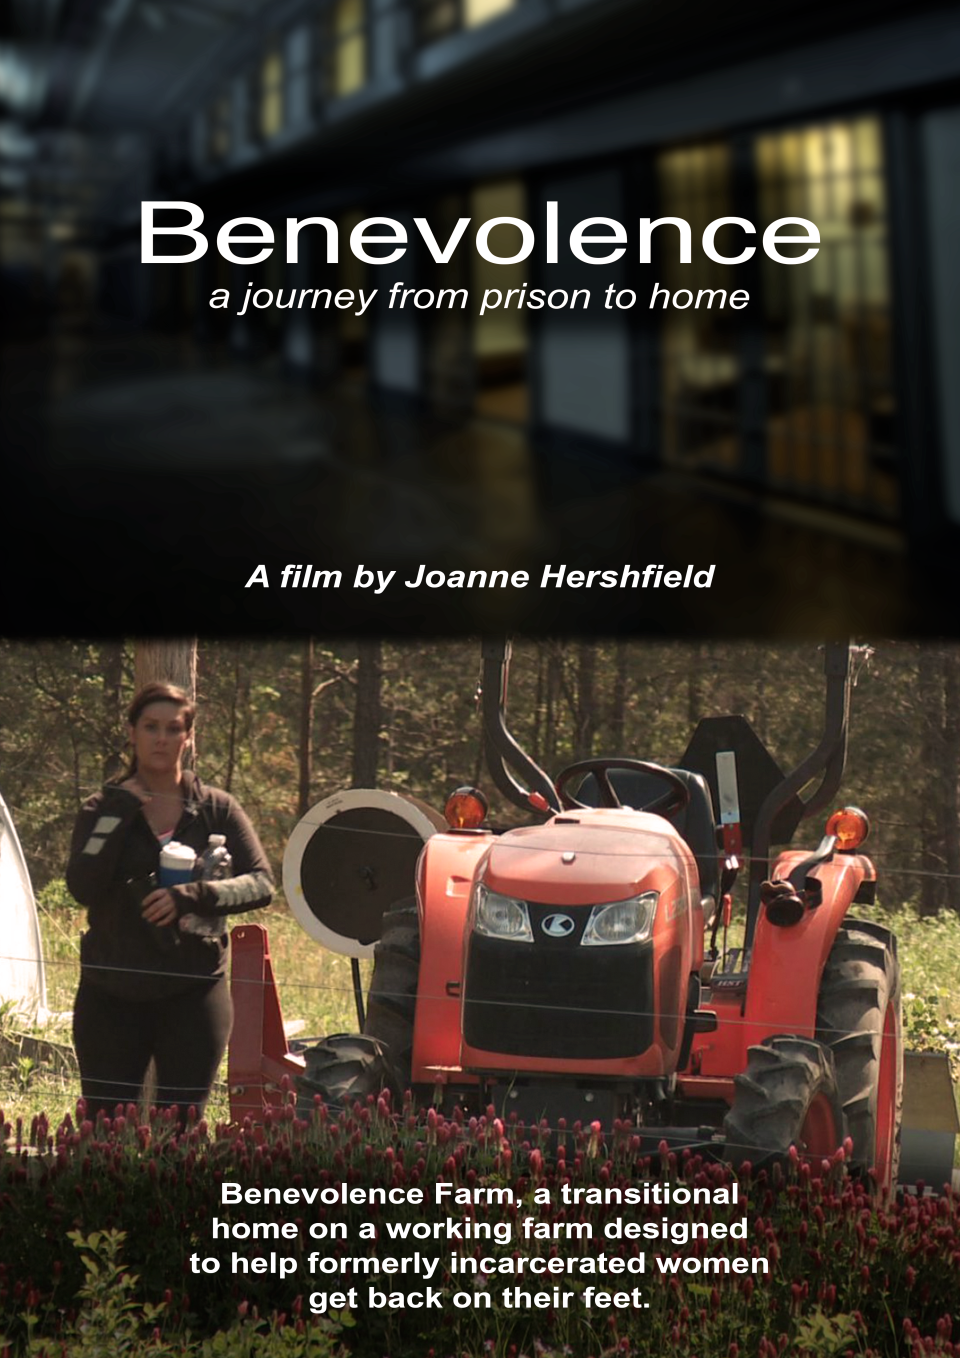 Benevolence: A Journey from Prison to Home